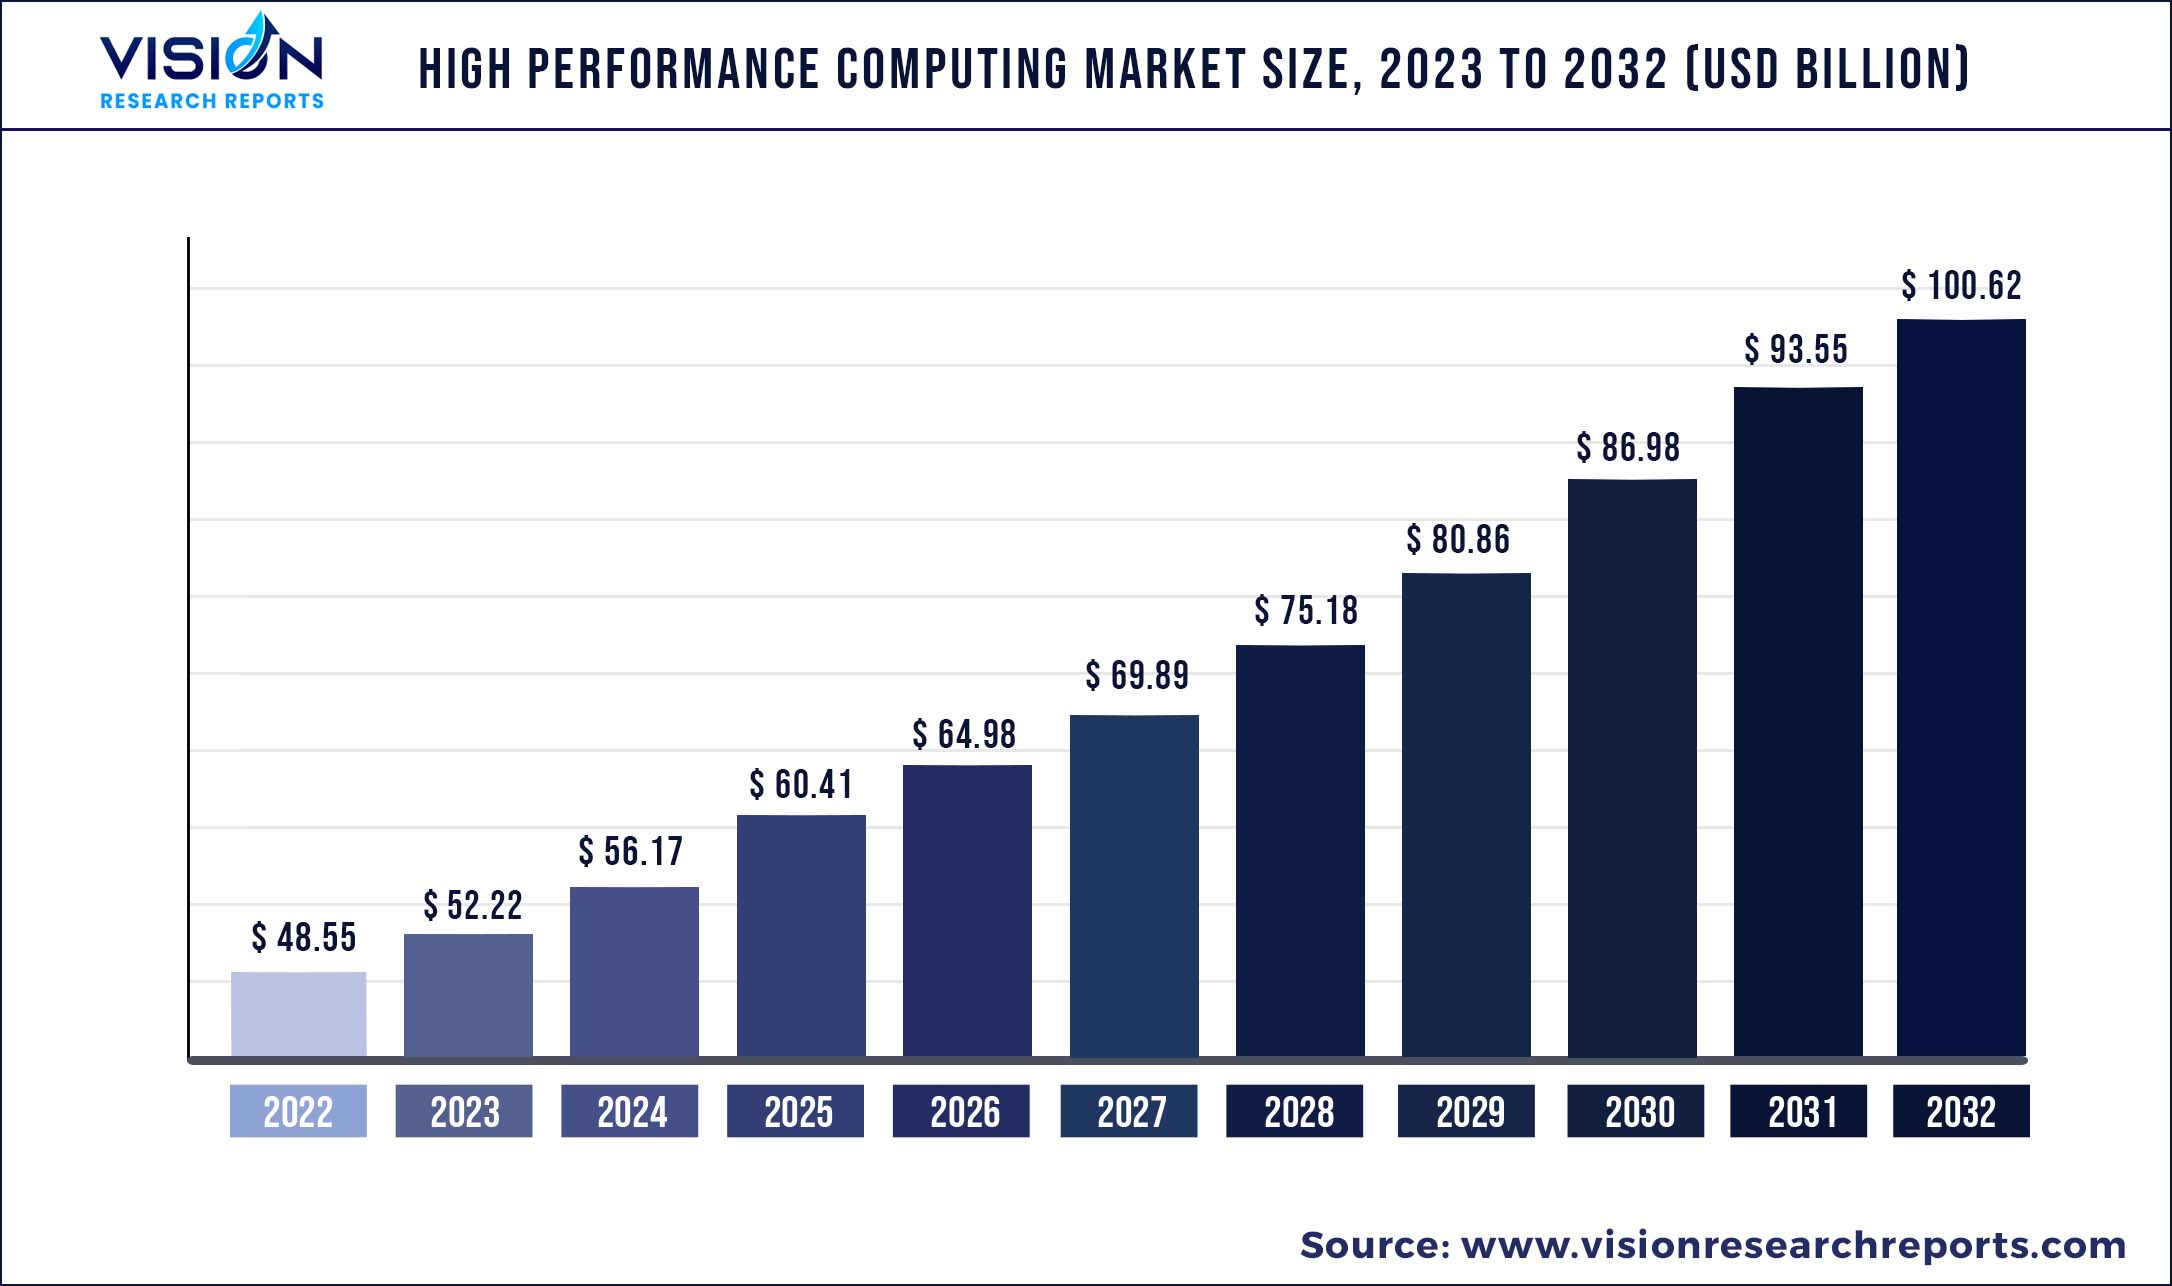 High Performance Computing Market Size 2023 to 2032